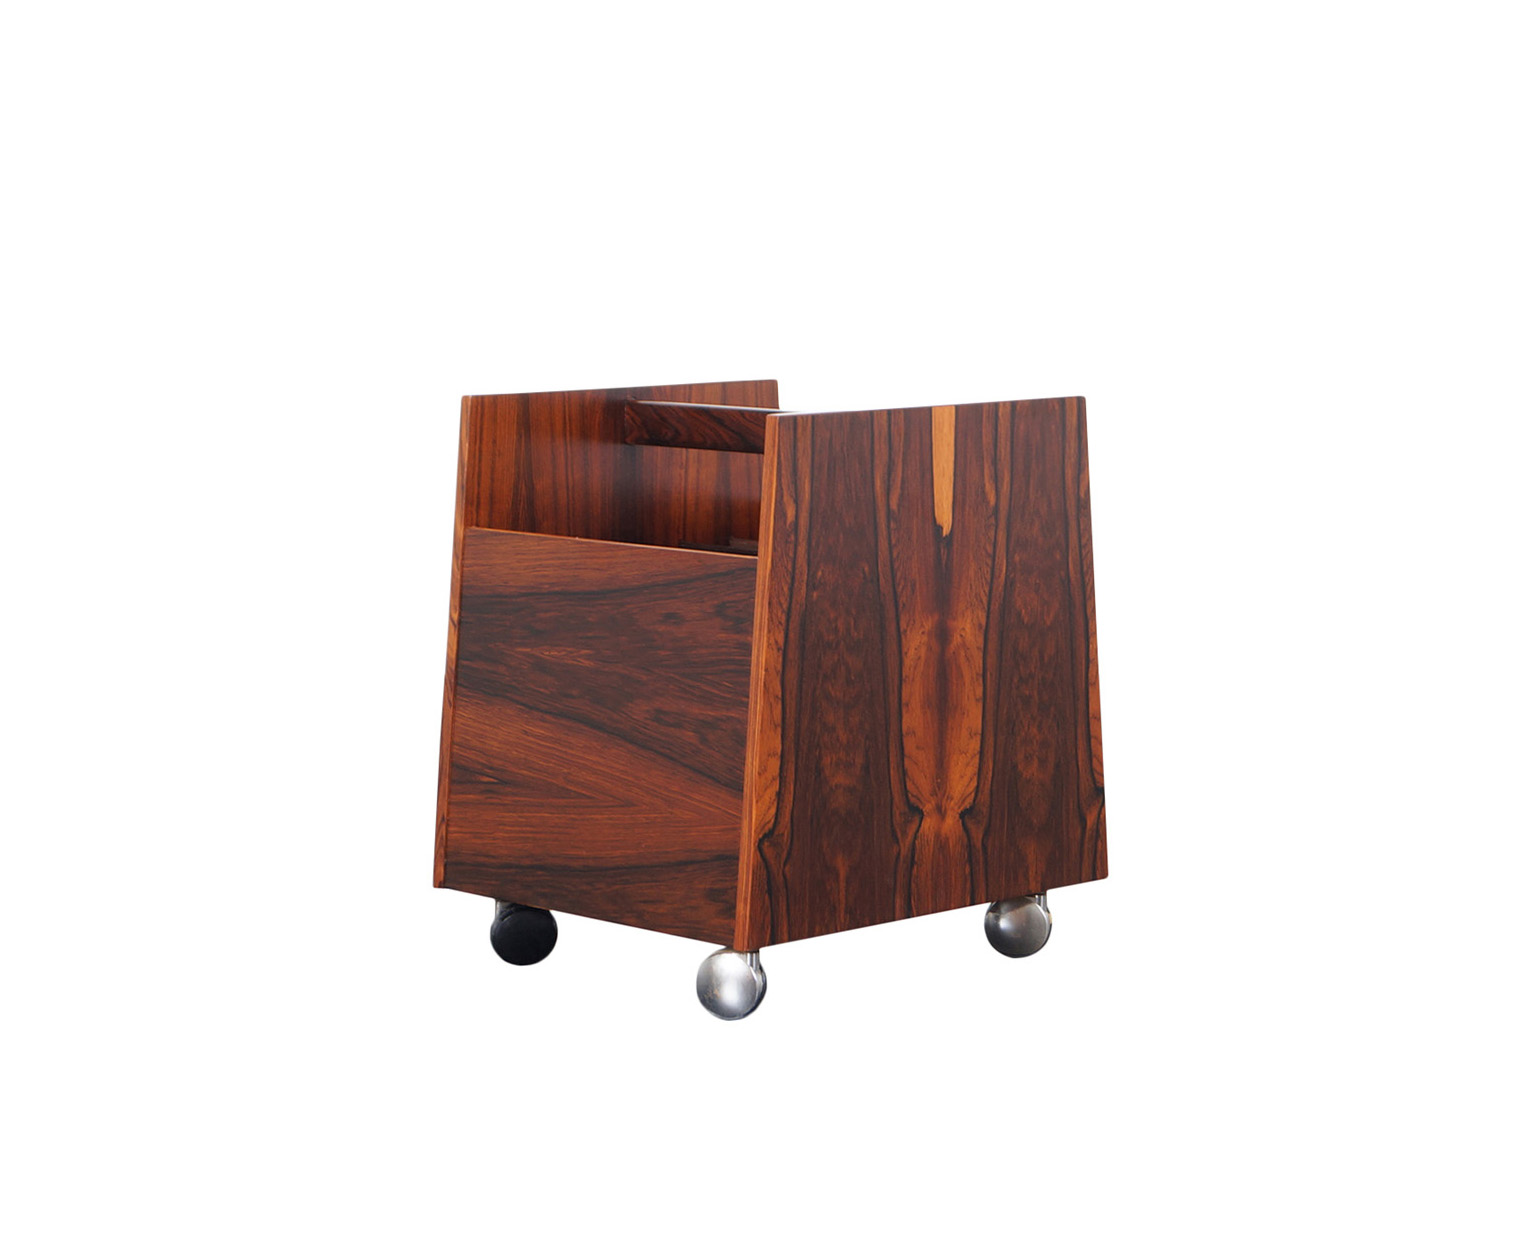 Danish Rosewood Magazine / Record Stand by Rolf Hesland